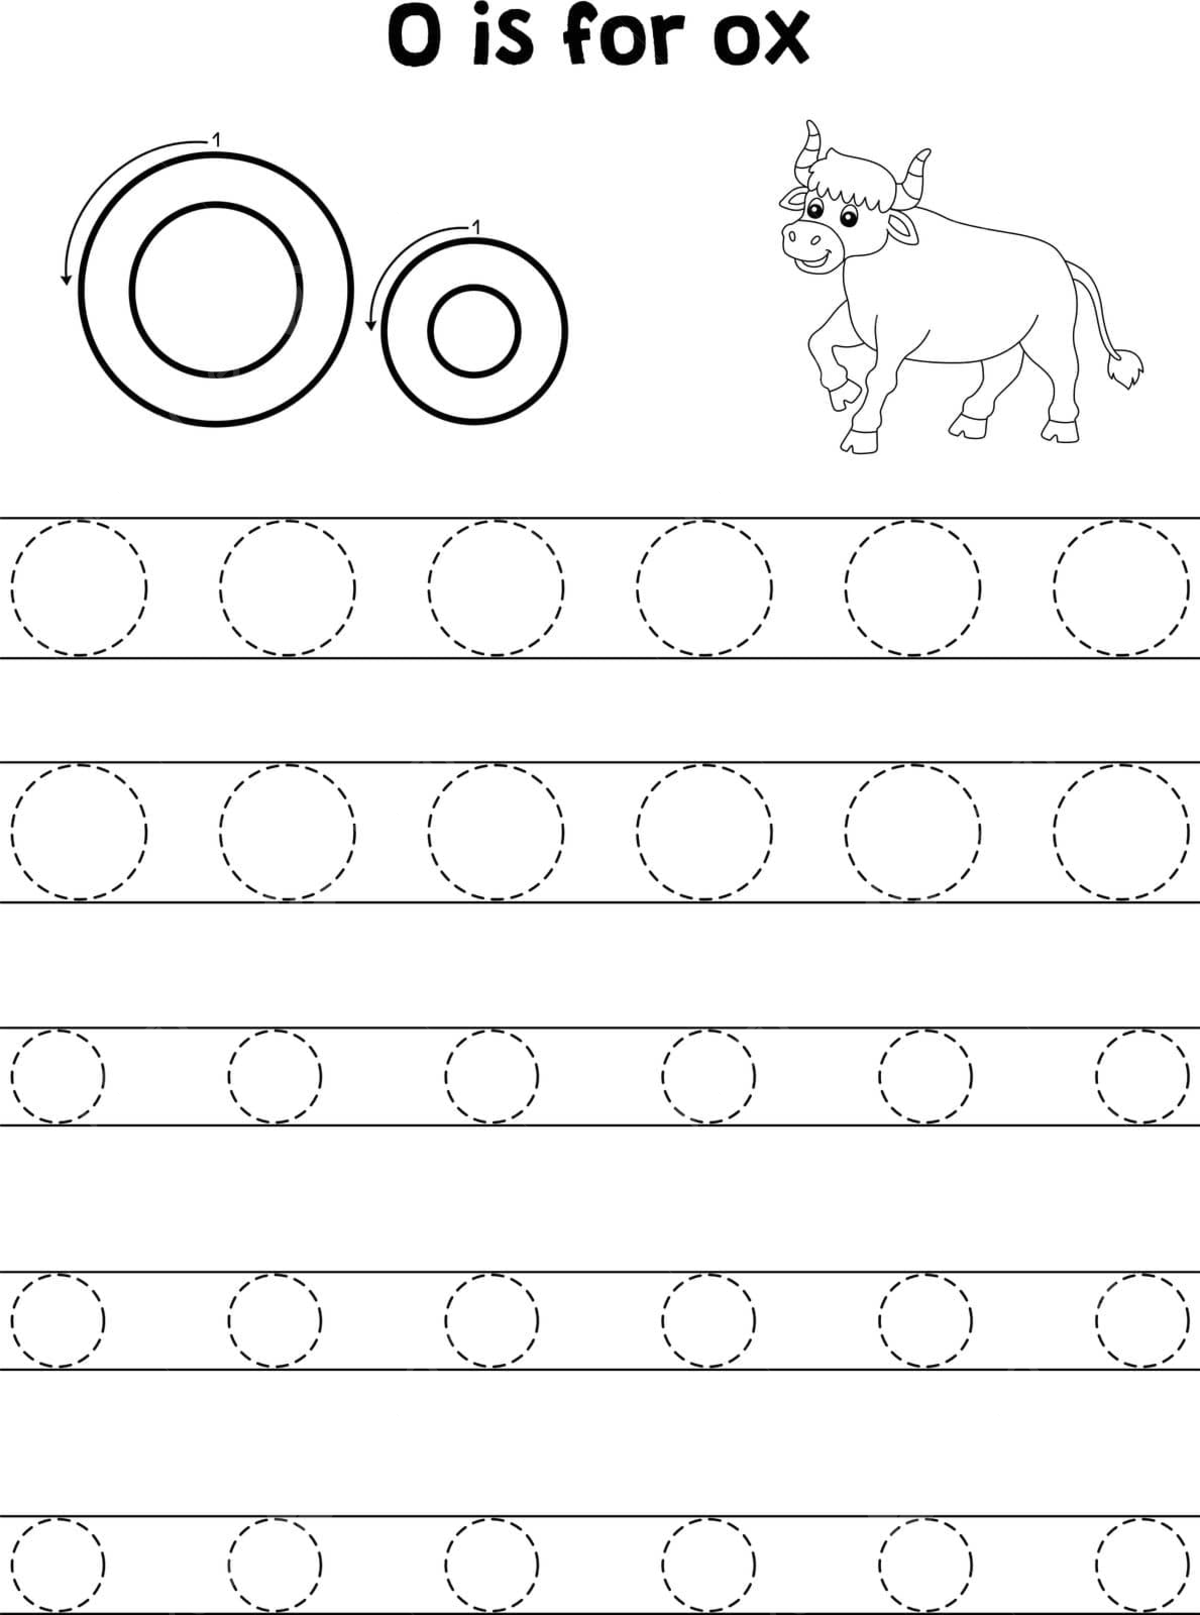 Abc coloring page tracing the letters with an ox animal vector illustration coloring book design png and vector with transparent background for free download